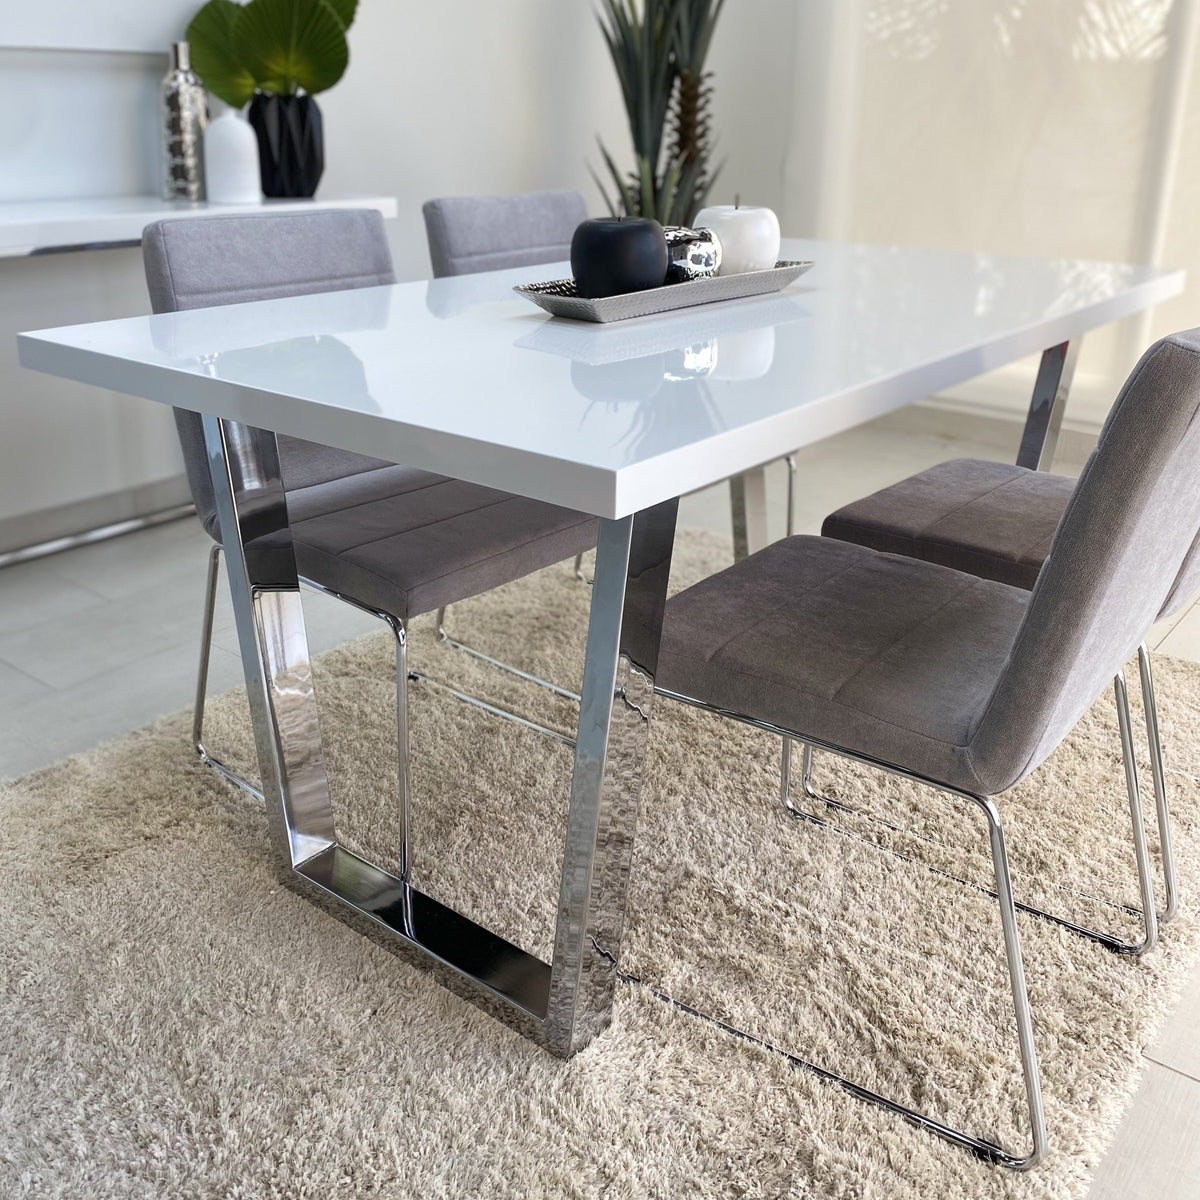 Clara Dining Table Lacquer White Top Stainless Steel Legs Set